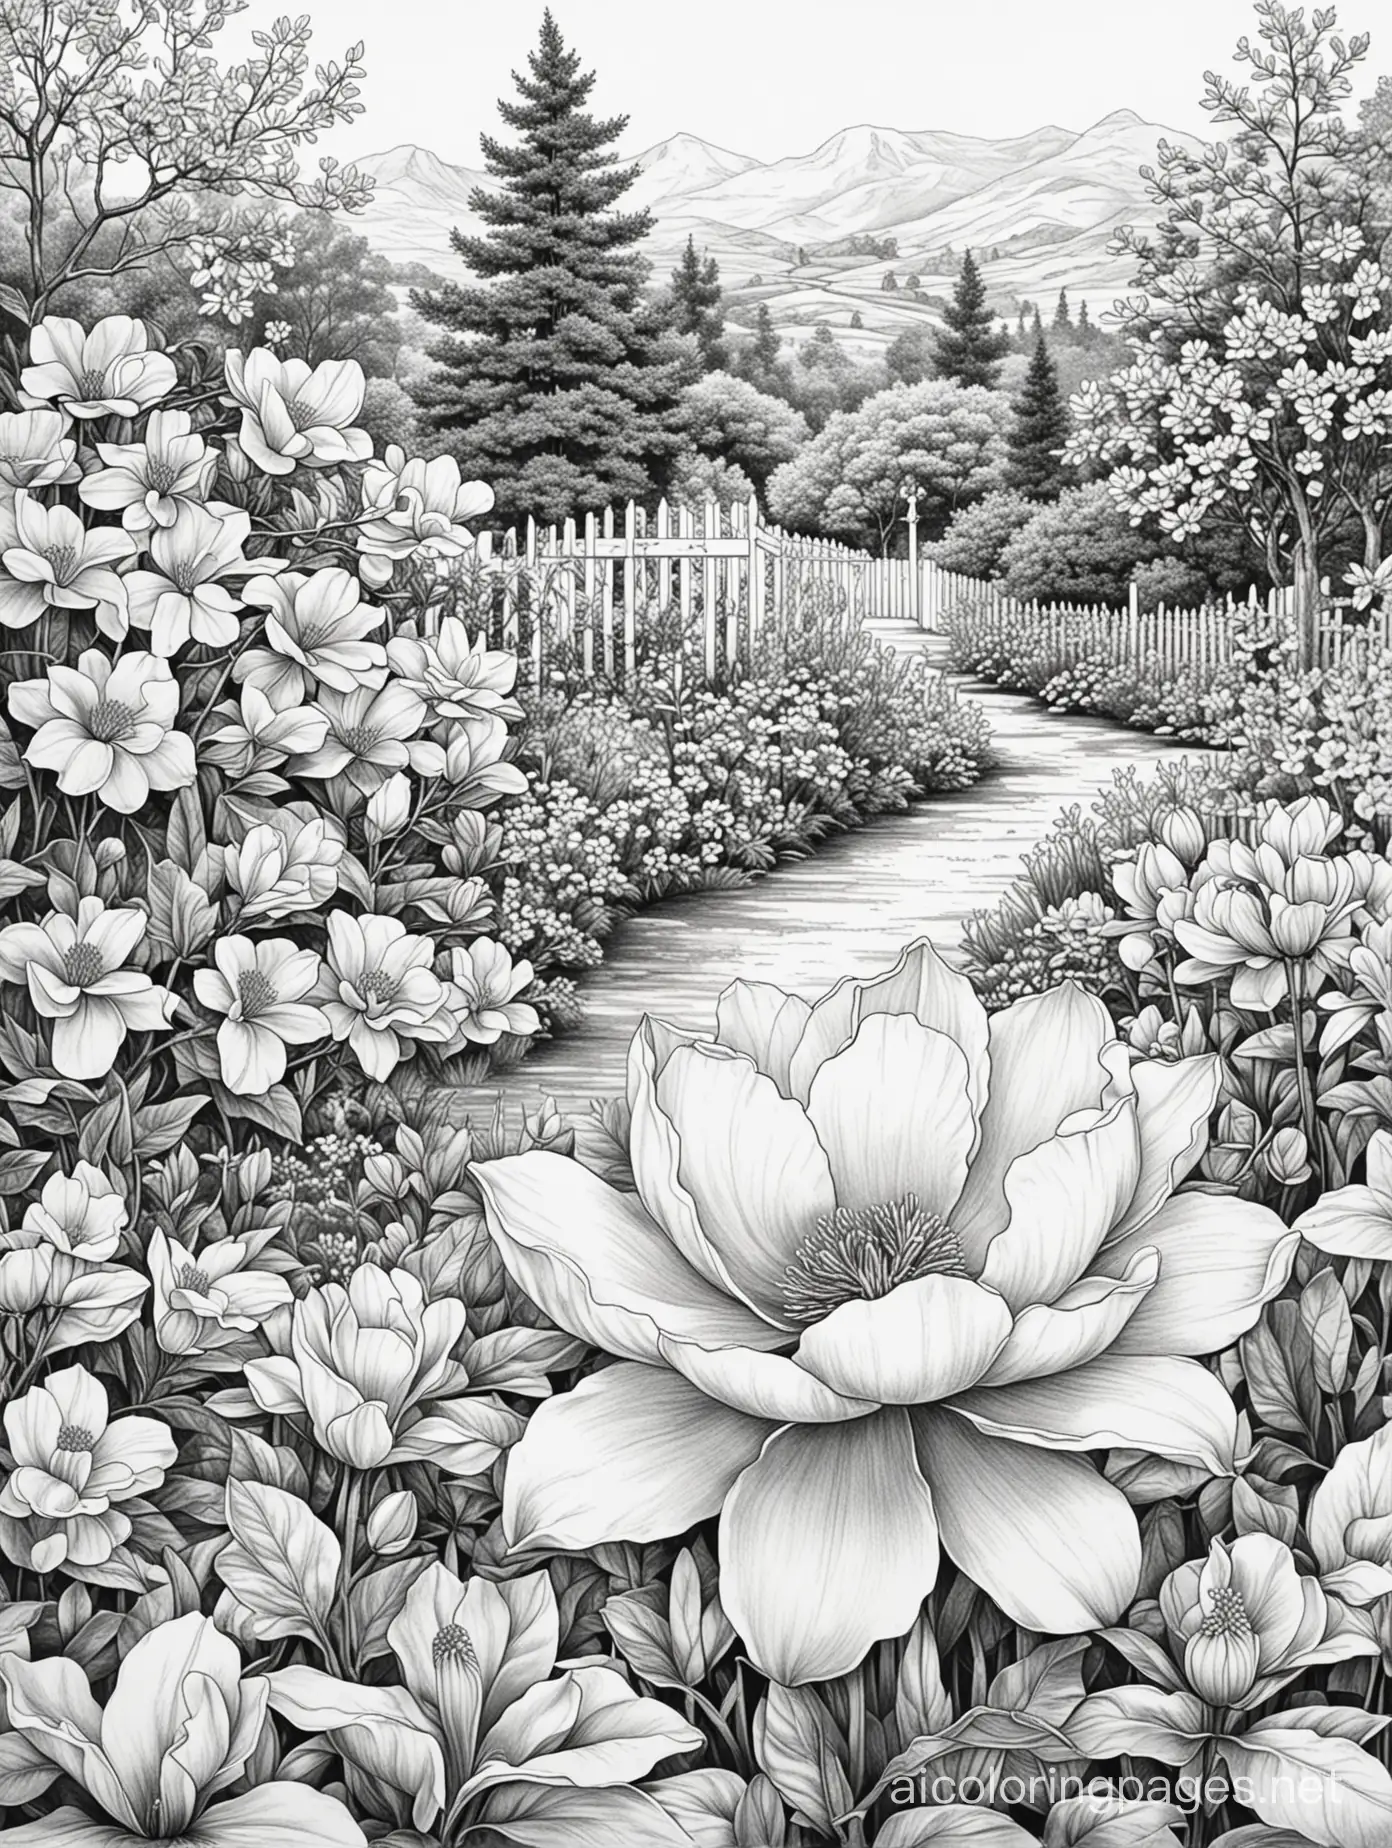 Create a picture for adult colouring in black and white only.  The theme of the picture: British garden. gardening. Sketching style, ink, line drawings.Magnificent magnolia in bloom There are also evergreen trees in the picture The detail of the picture is medium. there are light hills in the background Ratio 11:8.5, Coloring Page, black and white, line art, white background, Simplicity, Ample White Space. The background of the coloring page is plain white to make it easy for young children to color within the lines. The outlines of all the subjects are easy to distinguish, making it simple for kids to color without too much difficulty